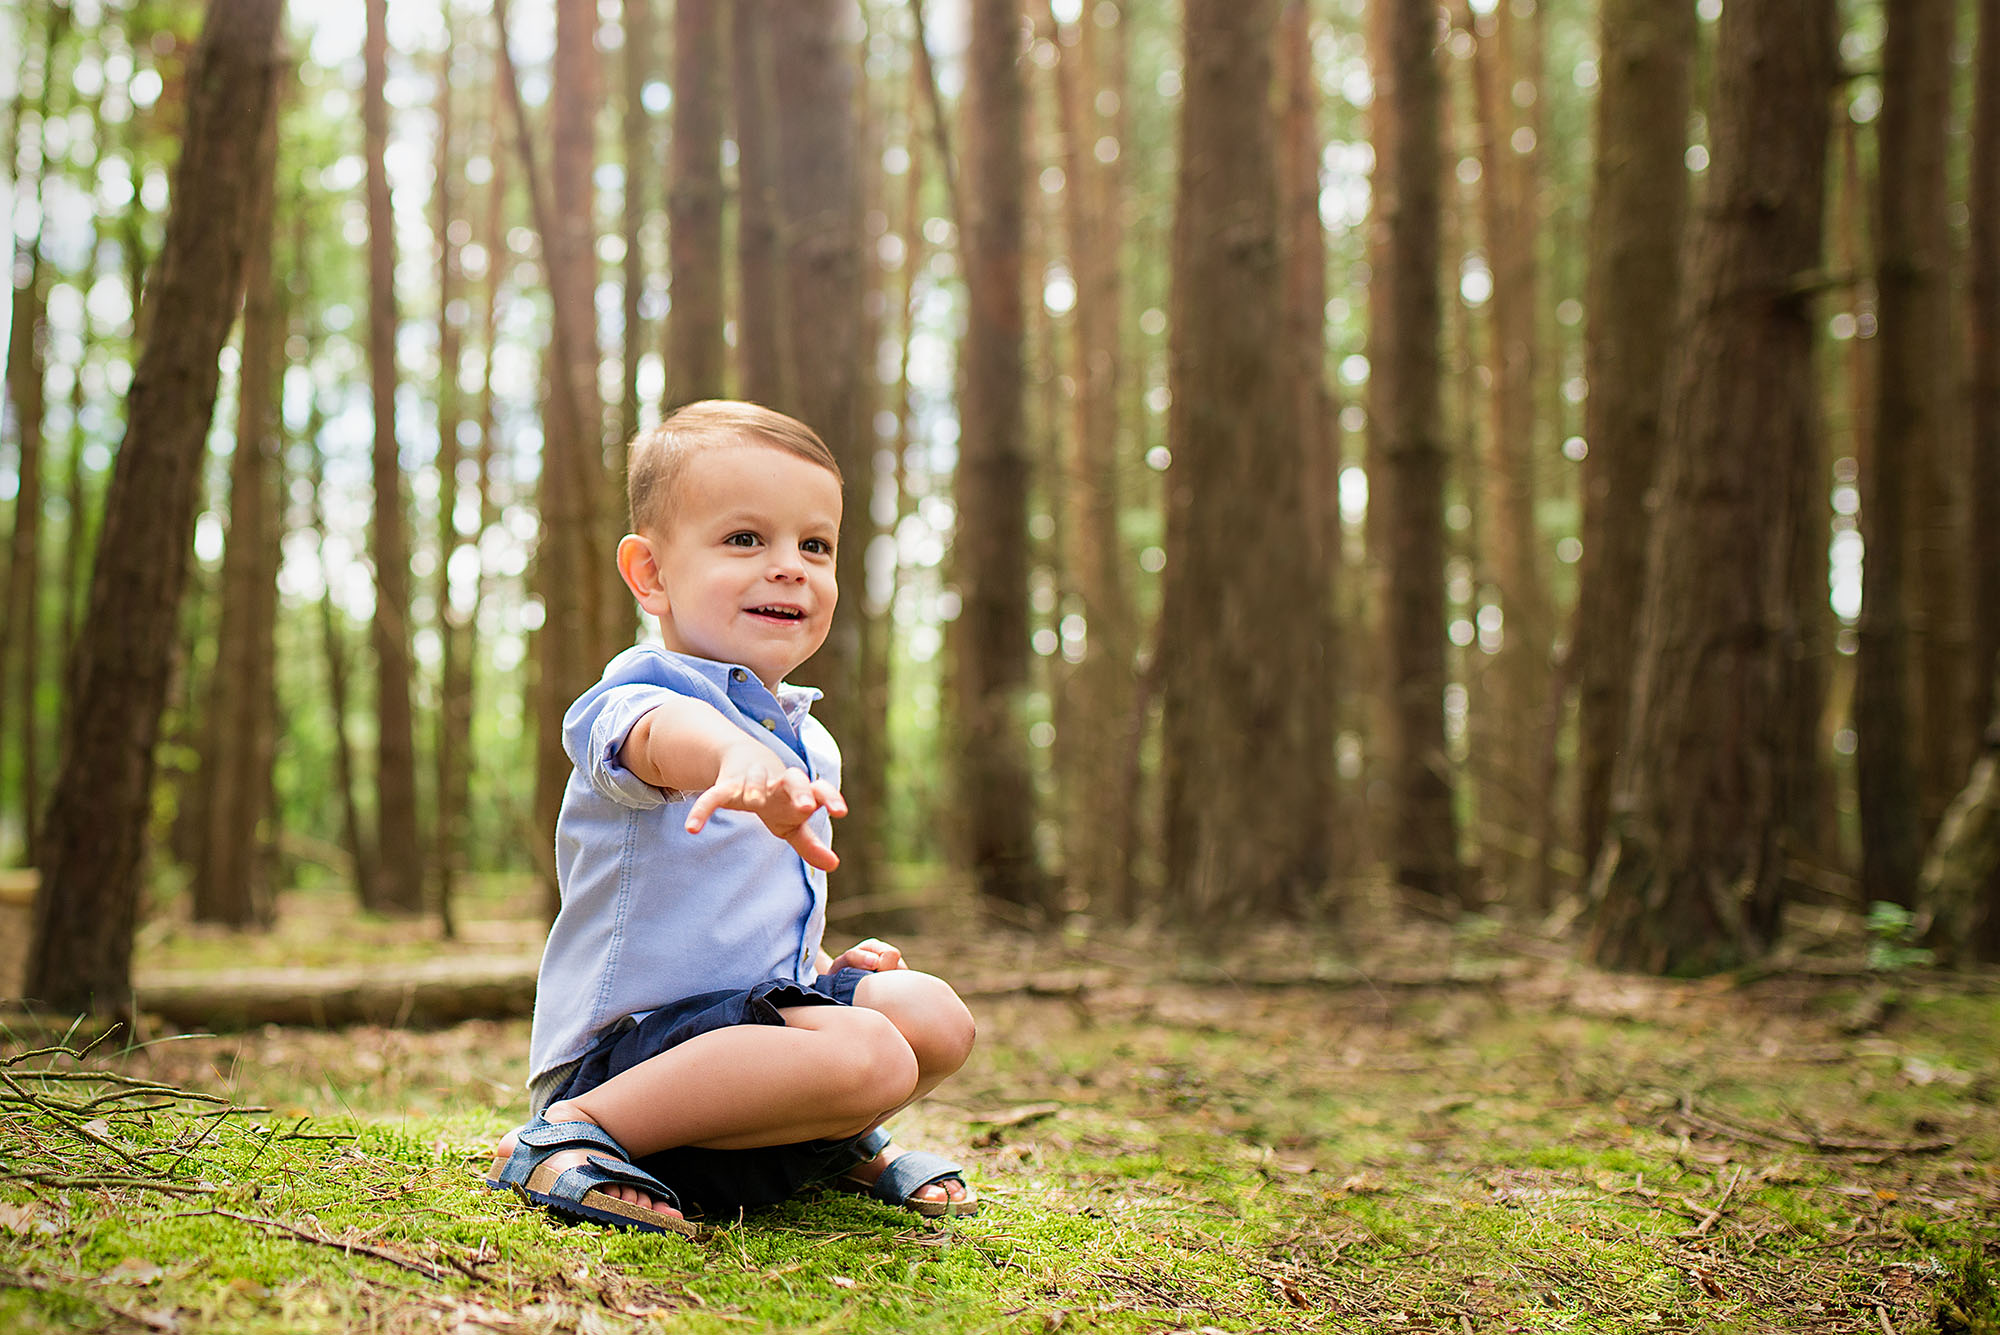 Family photographer Barnsley, boy playing with acorns in woodland